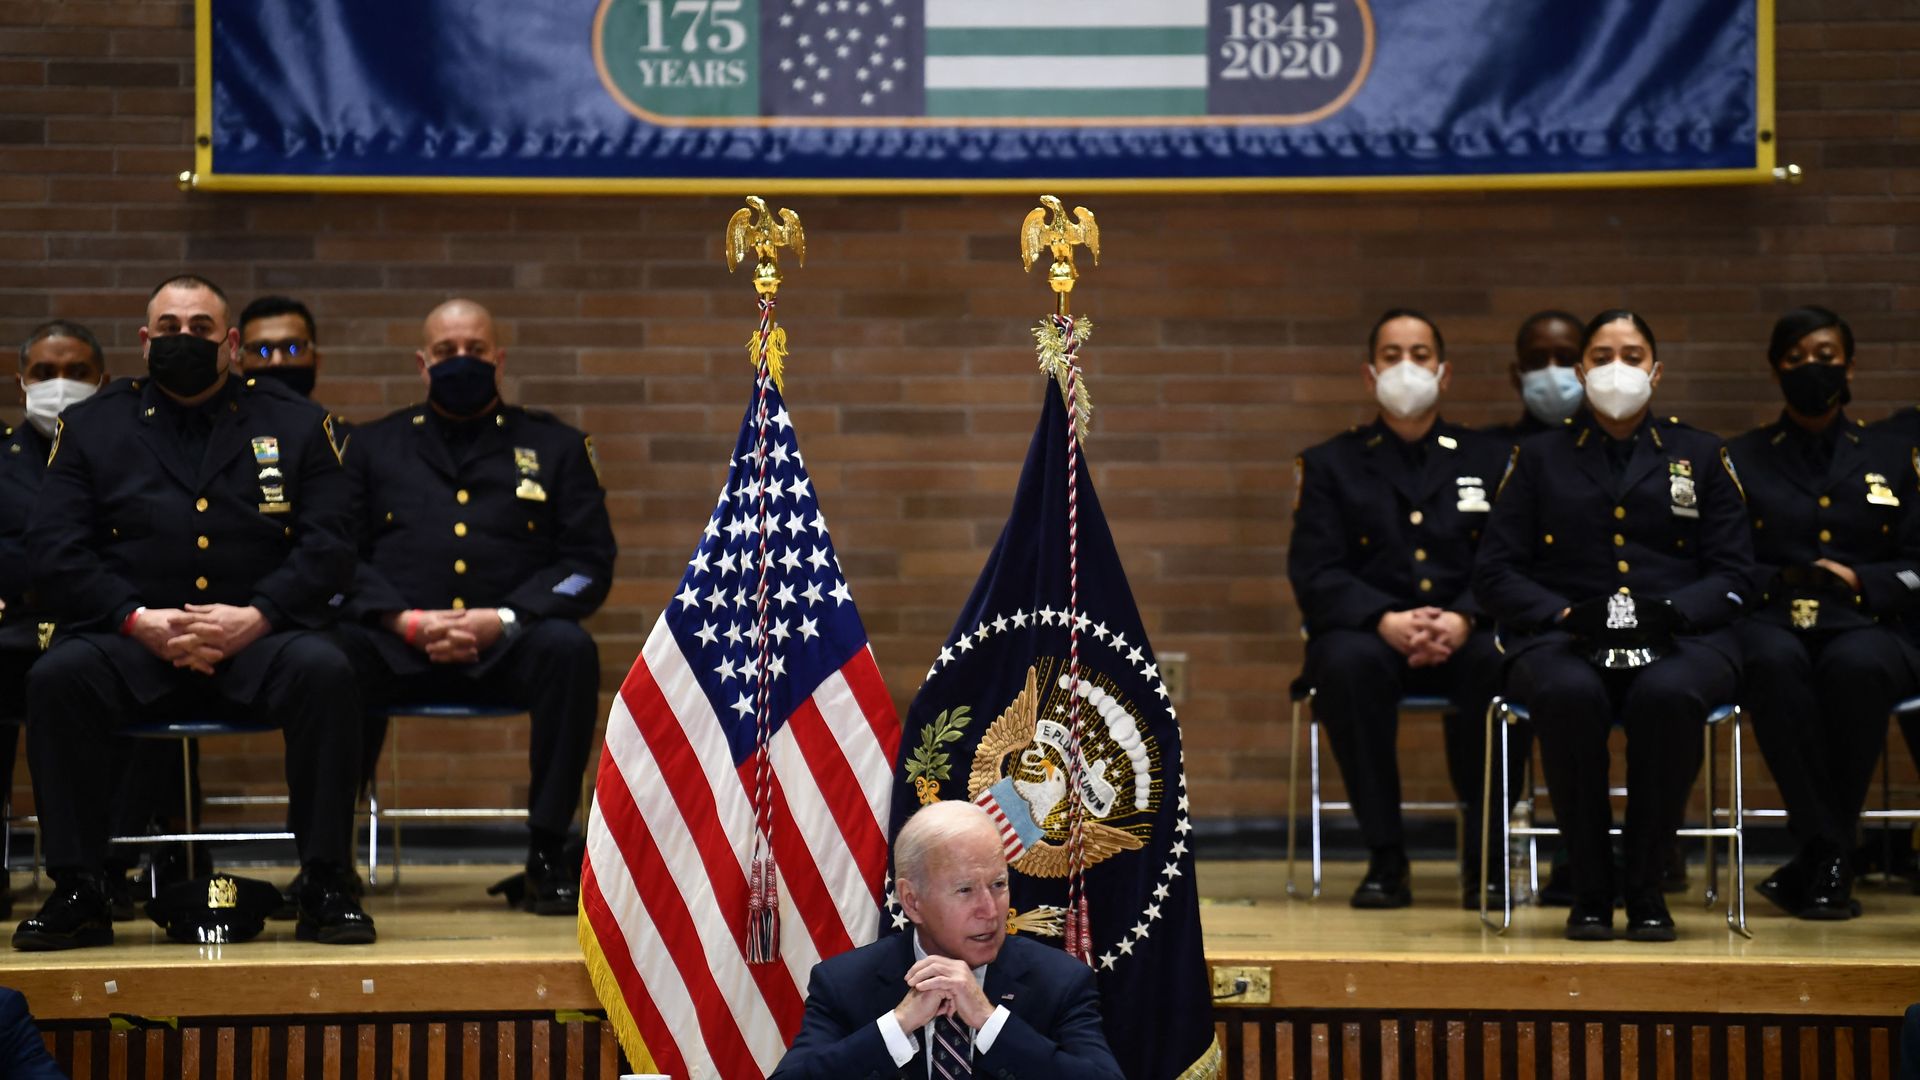 President Biden is seen discussing police reform during a visit last month to New York City.